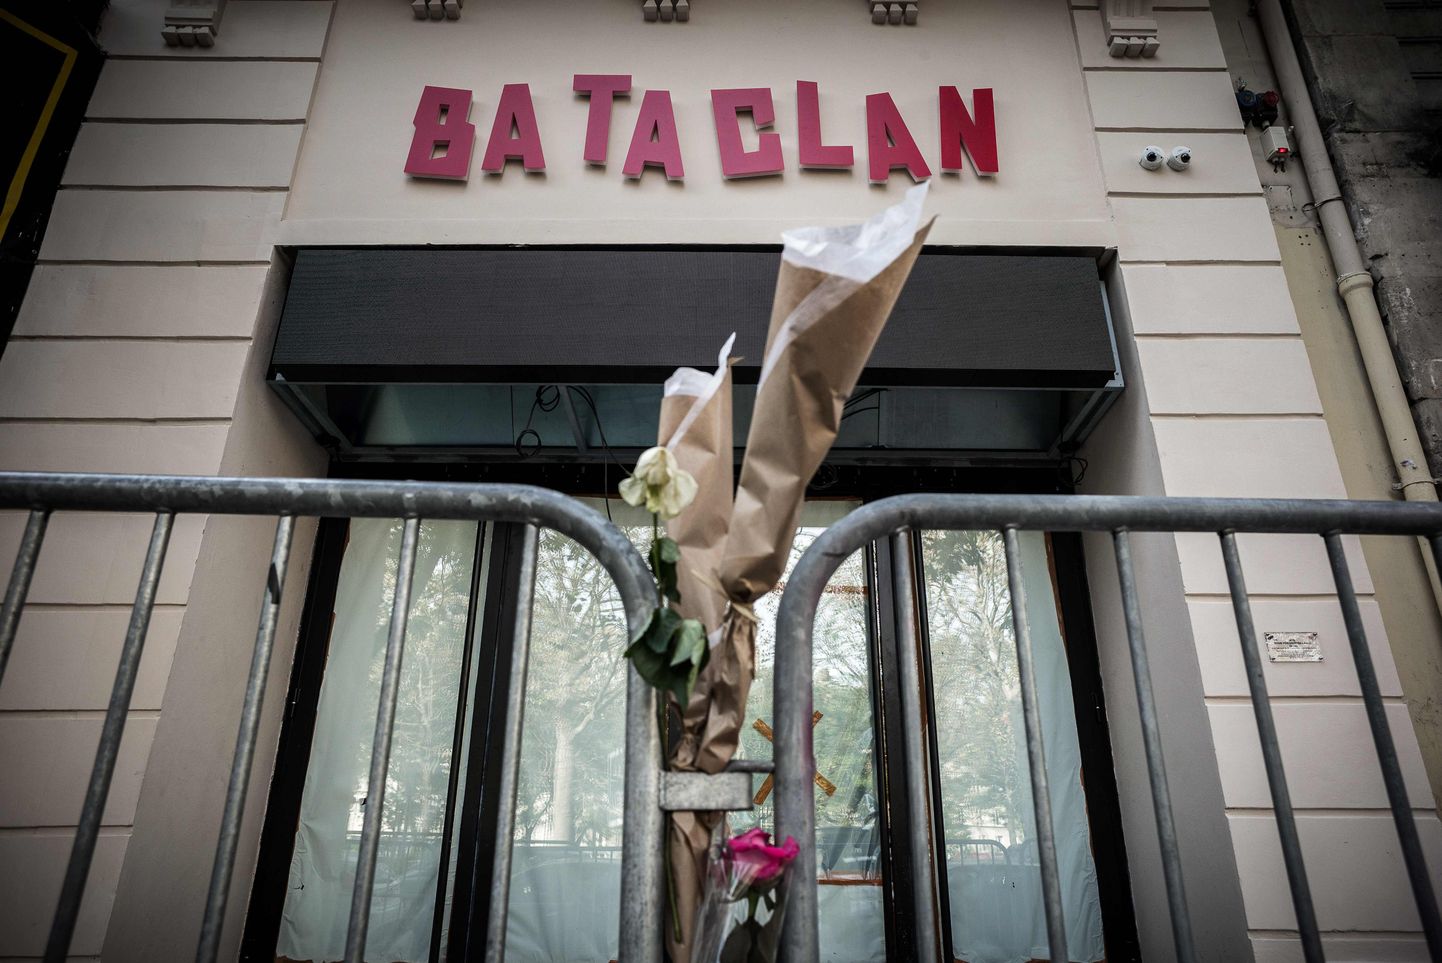 (FILES) This file photo taken on November 01, 2016 shows flowers tied to a fence outside the "Bataclan" concert hall during All Saints' day in Paris, one of the targets of the November 13, 2015 terrorist attacks during which 130 people were killed and another 413 were wounded.
British rock star Sting will re-open Paris' Bataclan concert hall on November 12, a day before the anniversary of the jihadist attacks that left 90 people dead there, the venue's owner said on November 4, 2016. The former frontman of The Police confirmed the announcement by Lagardere Unlimited Live Entertainment, saying in a statement on his website: "In re-opening the Bataclan, we have two important tasks to reconcile. "First, to remember and honour those who lost their lives in the attack a year ago, and second to celebrate the life and the music that this historic theatre represents." / AFP PHOTO / PHILIPPE LOPEZ